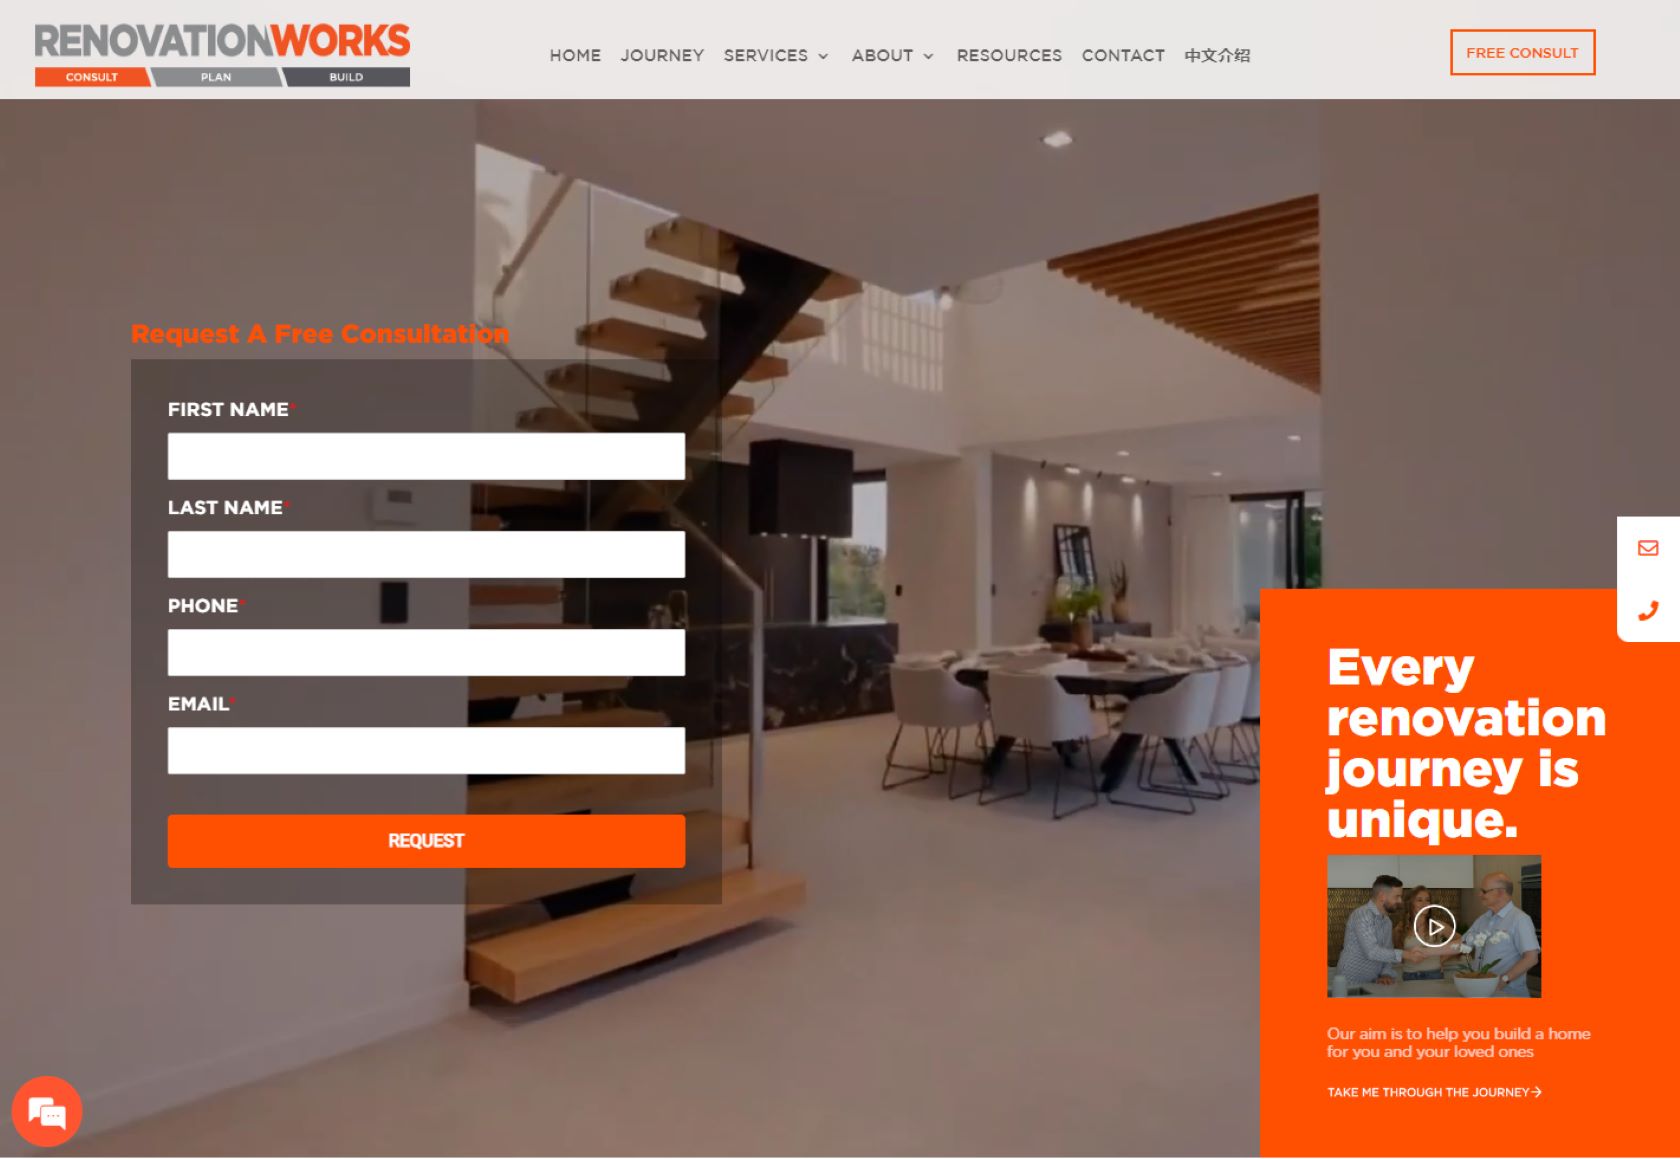 Renovation works contact webpage